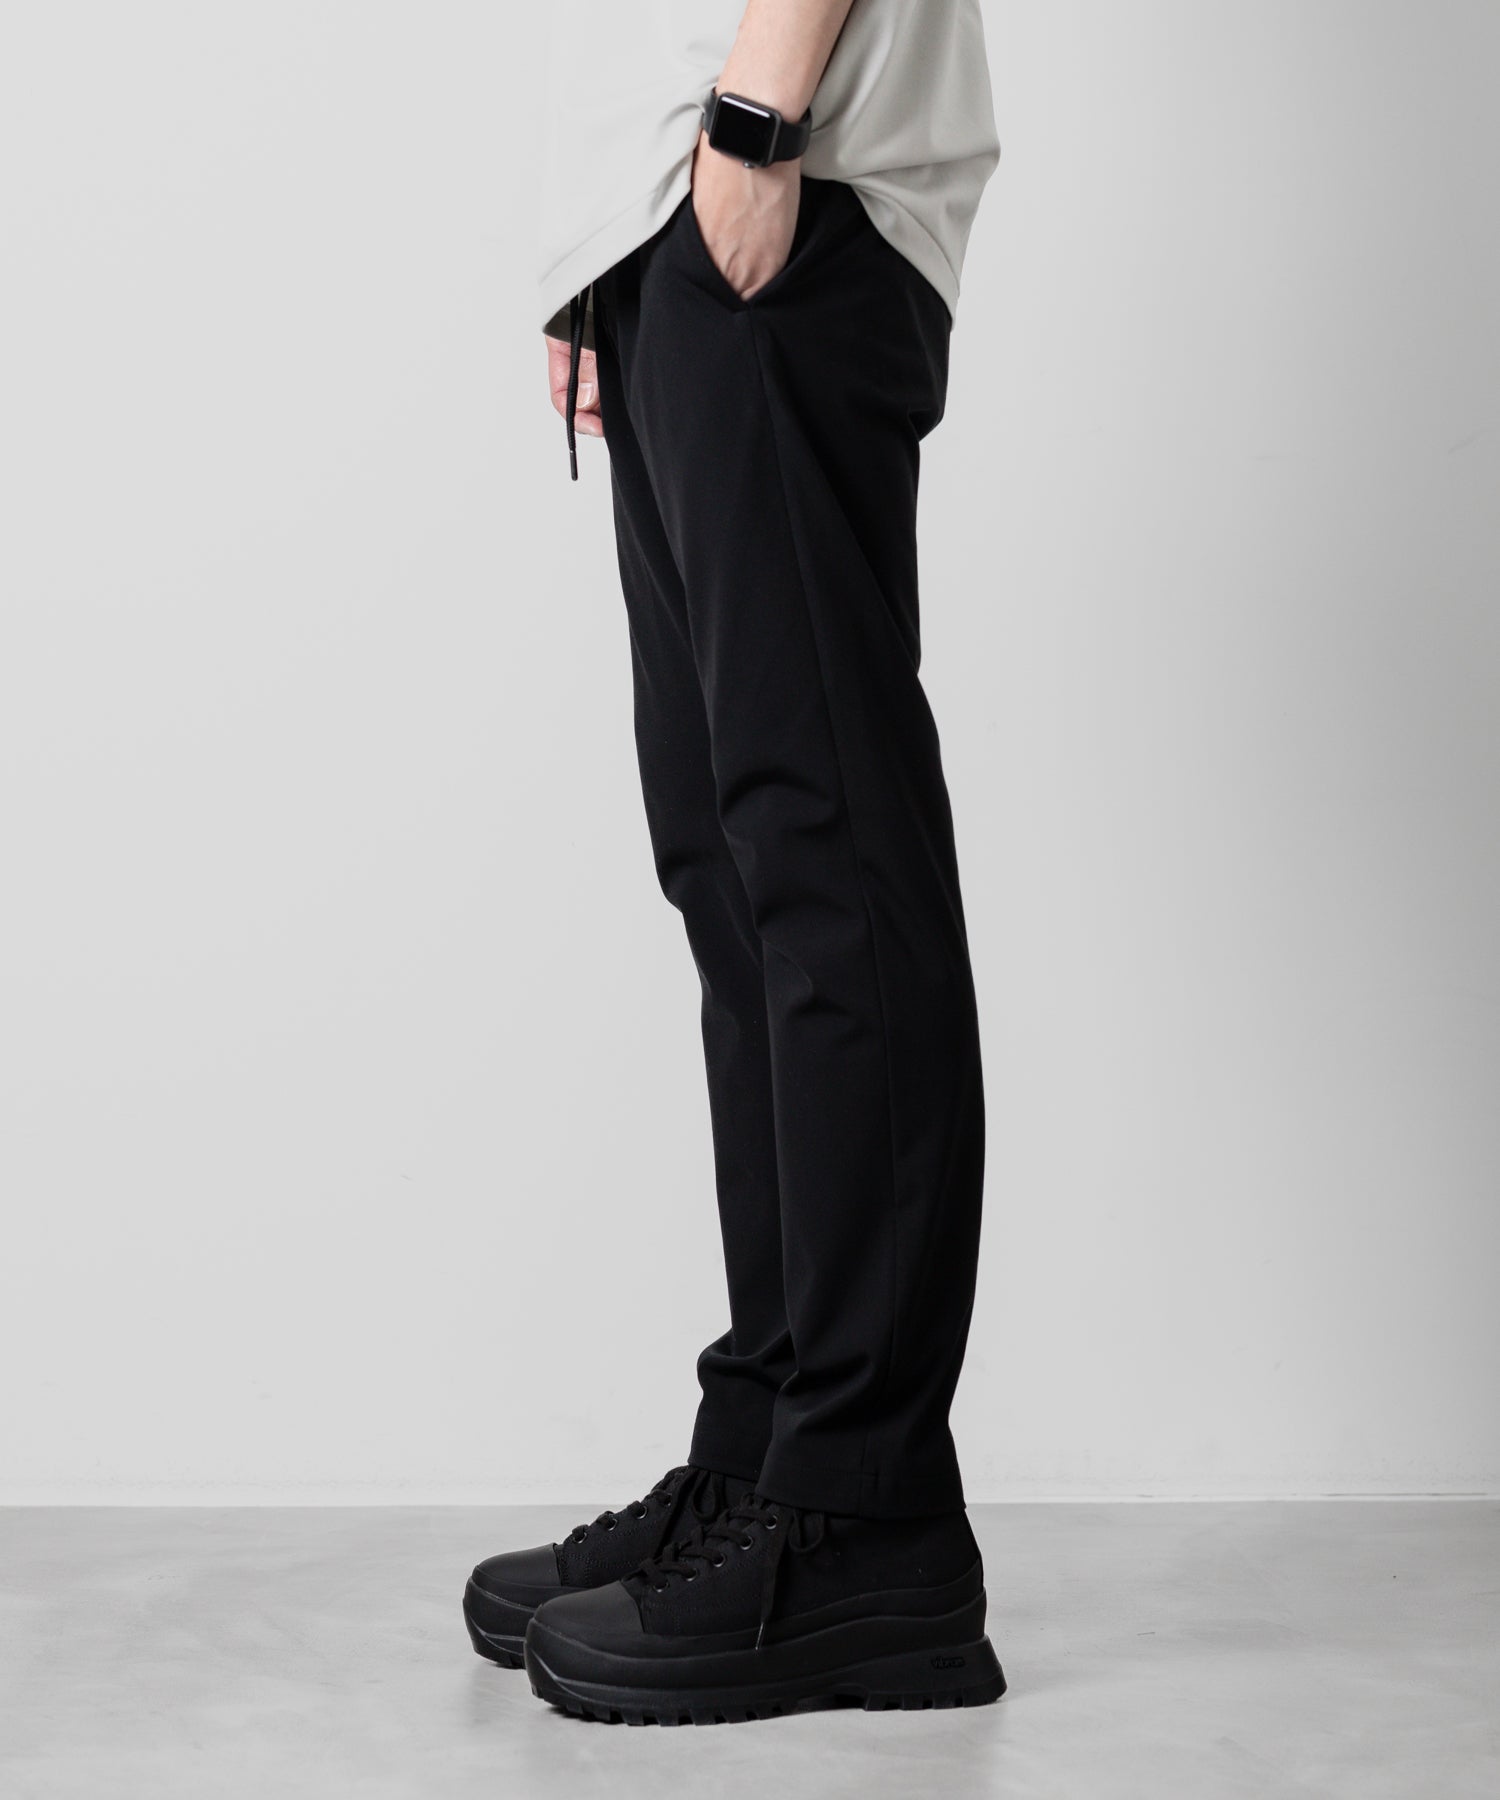 【ATTACHMENT】ATTACHMENT アタッチメントのNY/CO STRETCH JERSEY REGULAR FIT EASY TROUSERS - BLACK 公式通販サイトsession福岡セレクトショップ